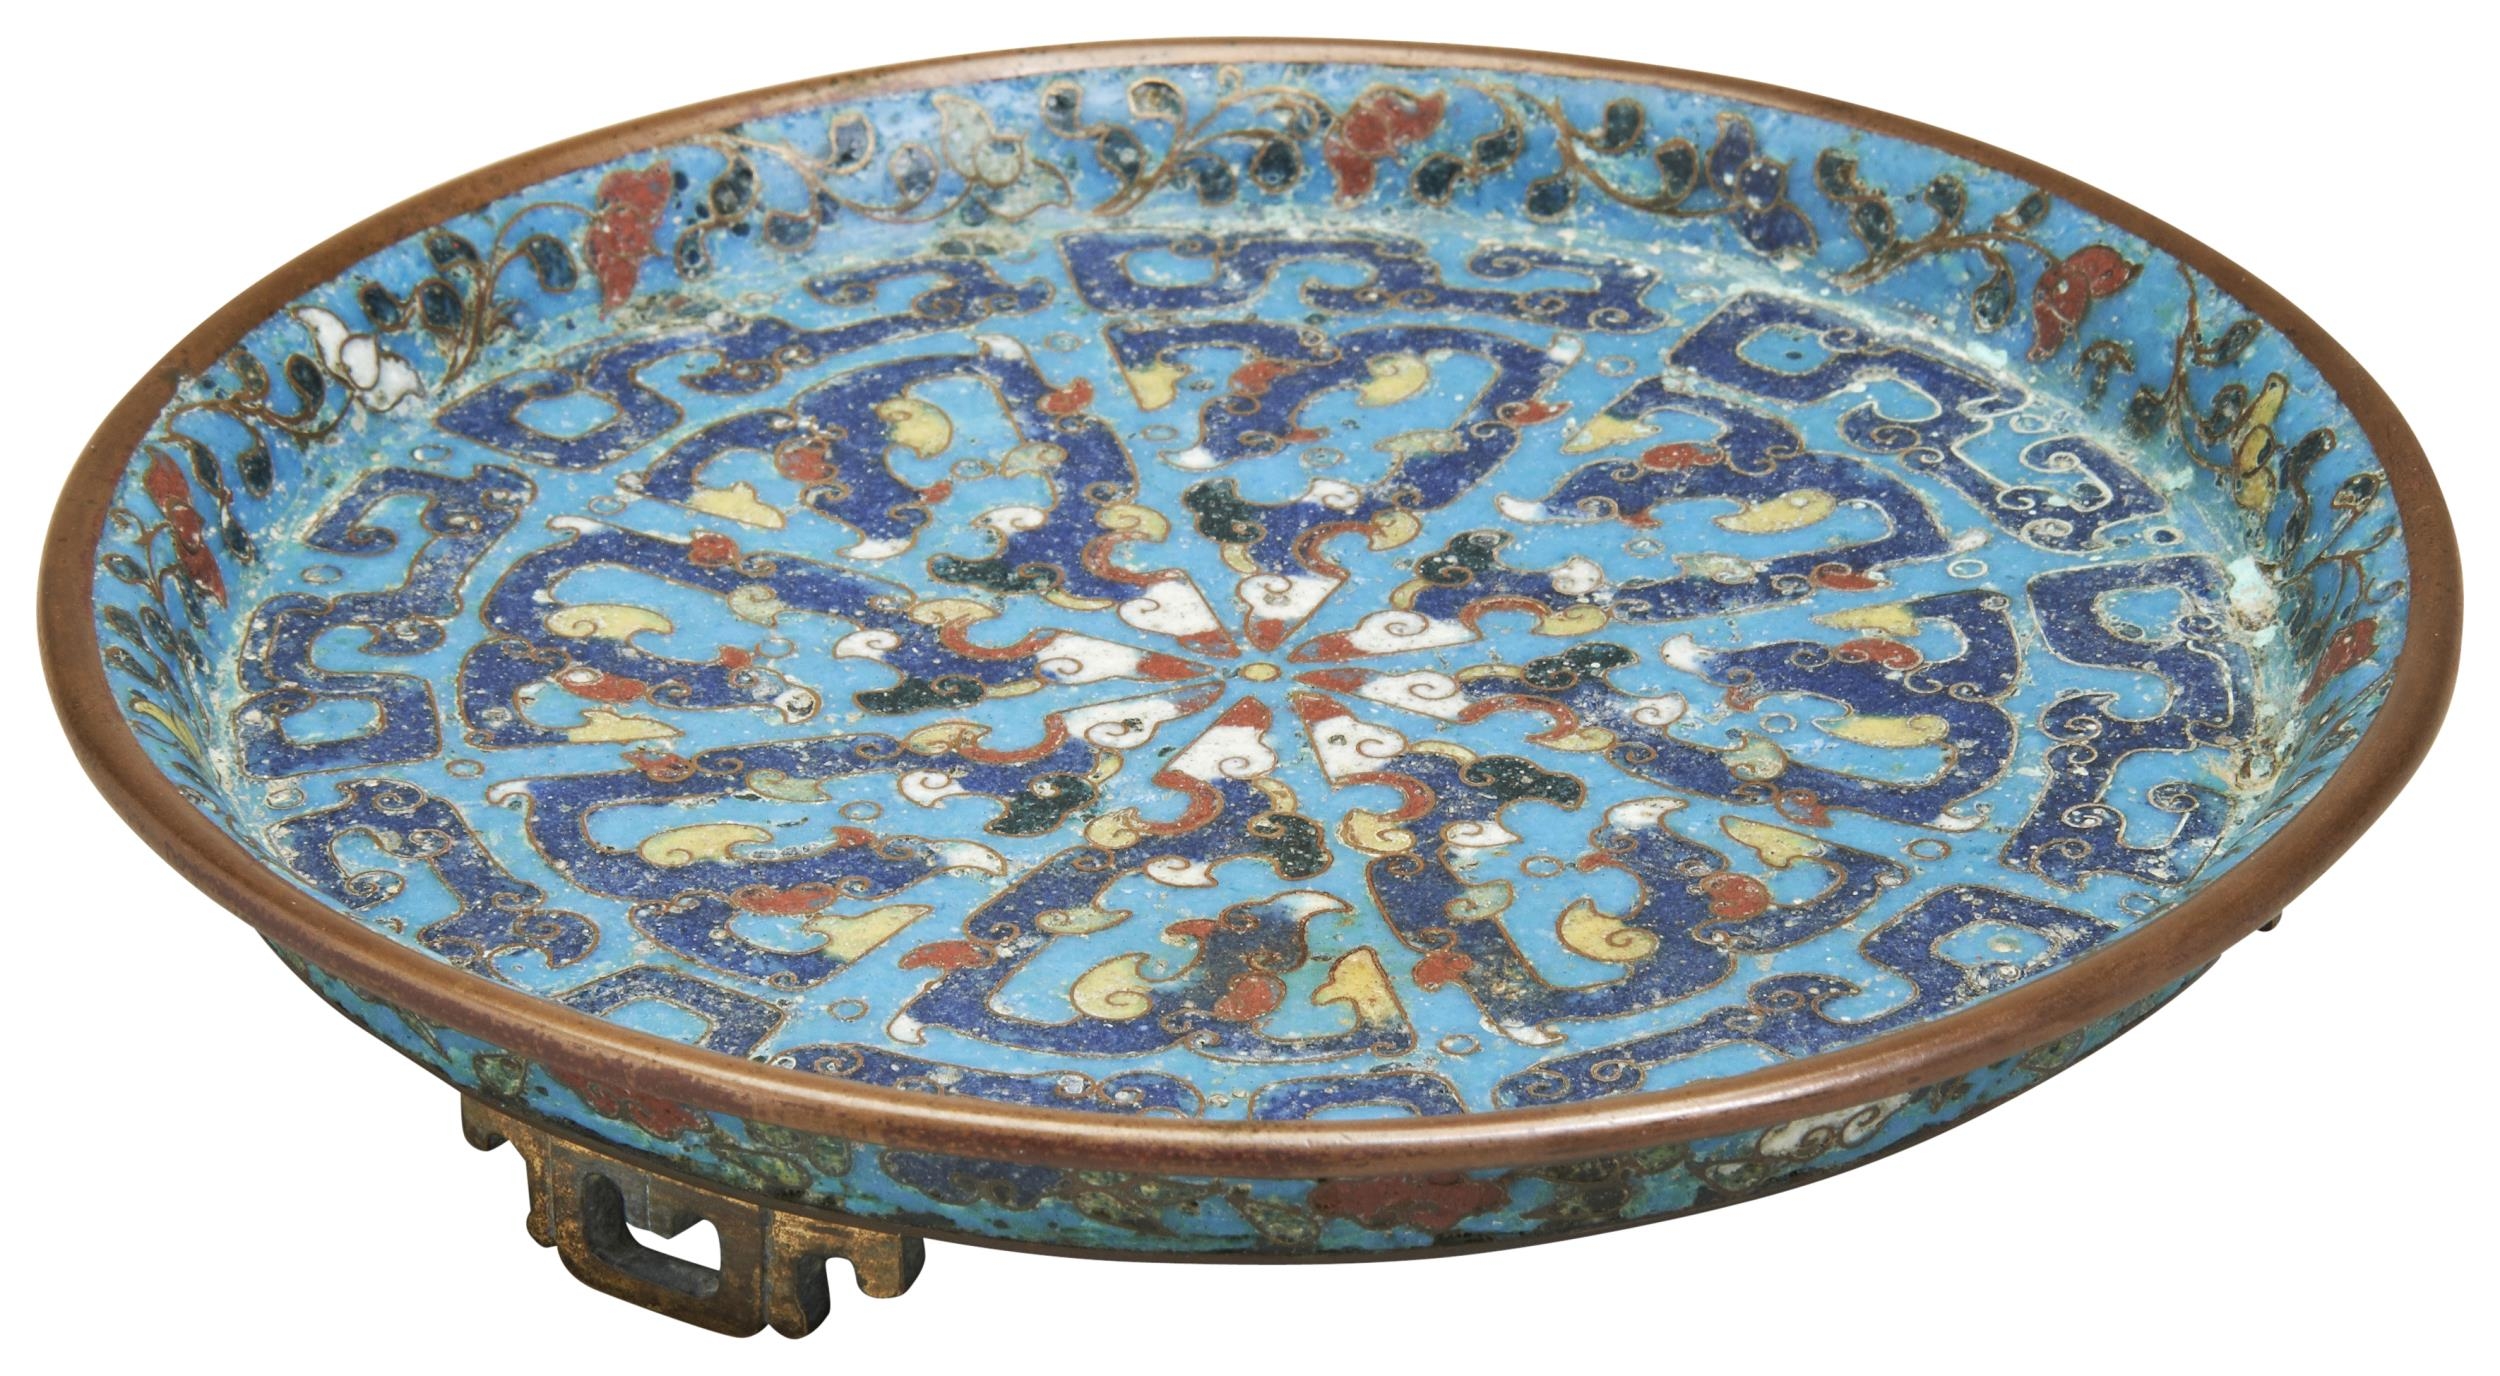 A SMALL CLOISONNE TRIPOD DISH MING DYNASTY (1368-1644)  明 掐丝珐琅盘 unusual cloisonne dish decorated